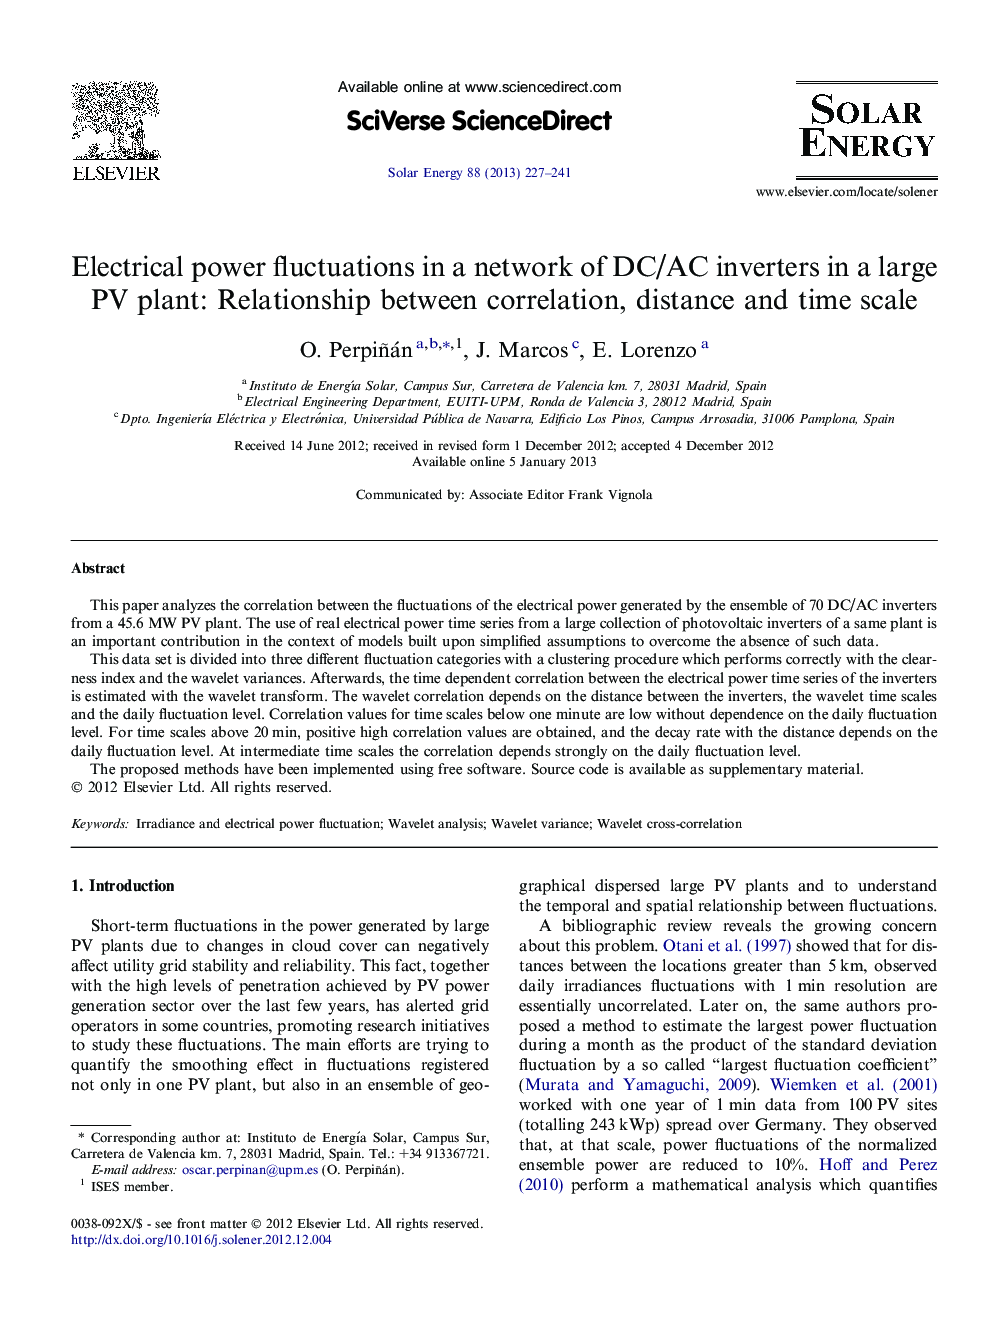 Electrical power fluctuations in a network of DC/AC inverters in a large PV plant: Relationship between correlation, distance and time scale